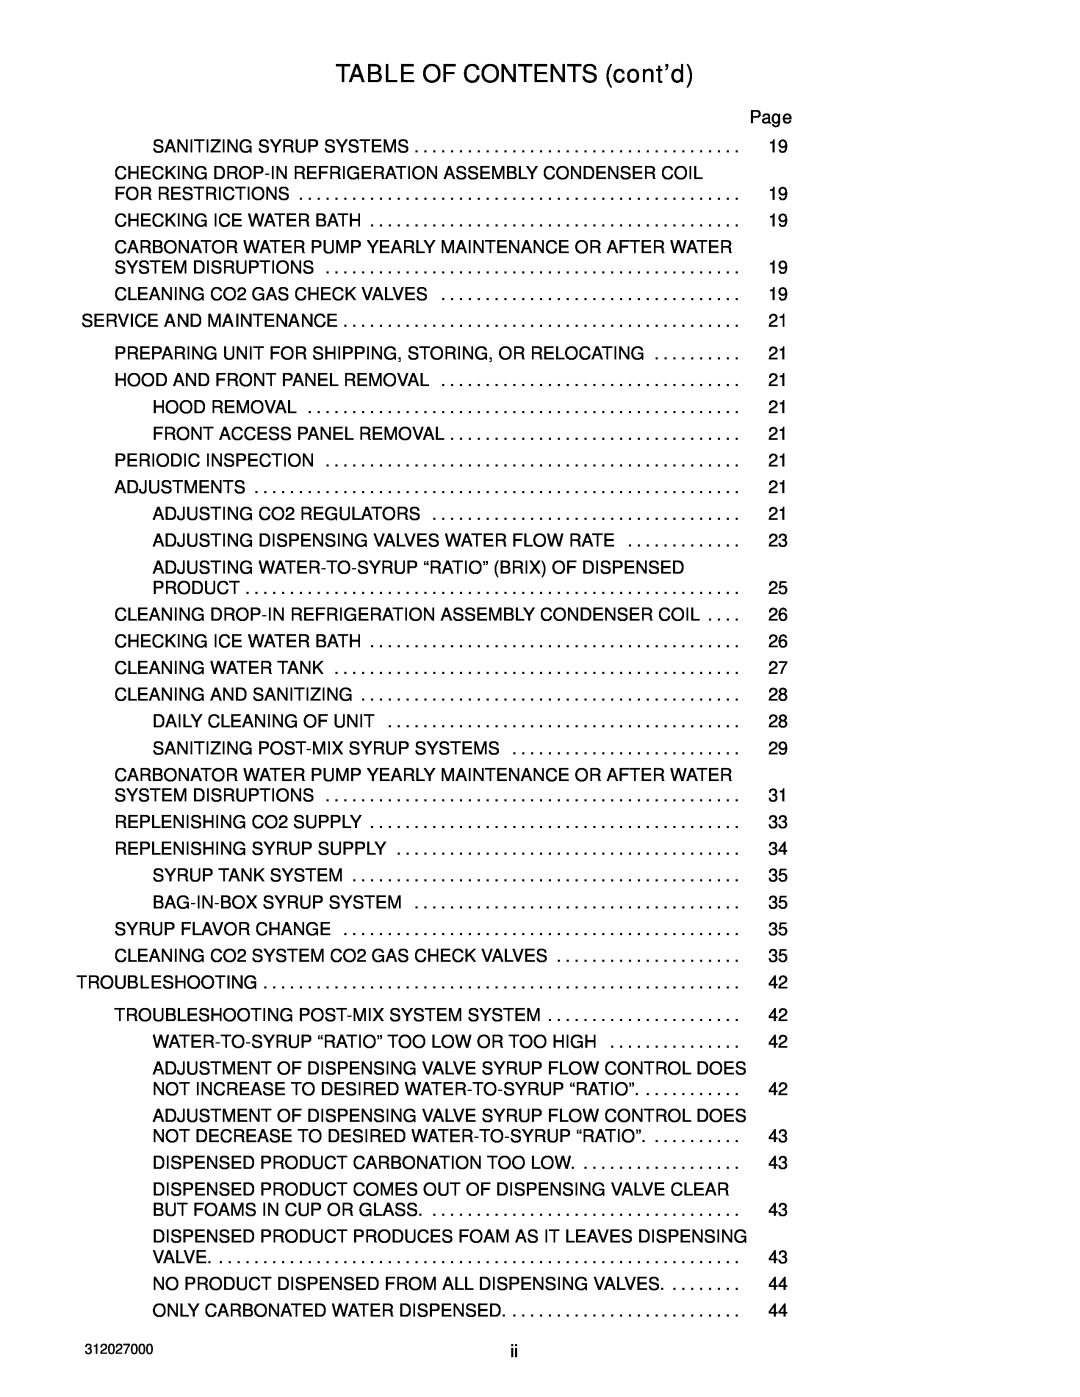 Cornelius R-134A service manual TABLE OF CONTENTS cont’d, Page, Service And Maintenance, Troubleshooting 